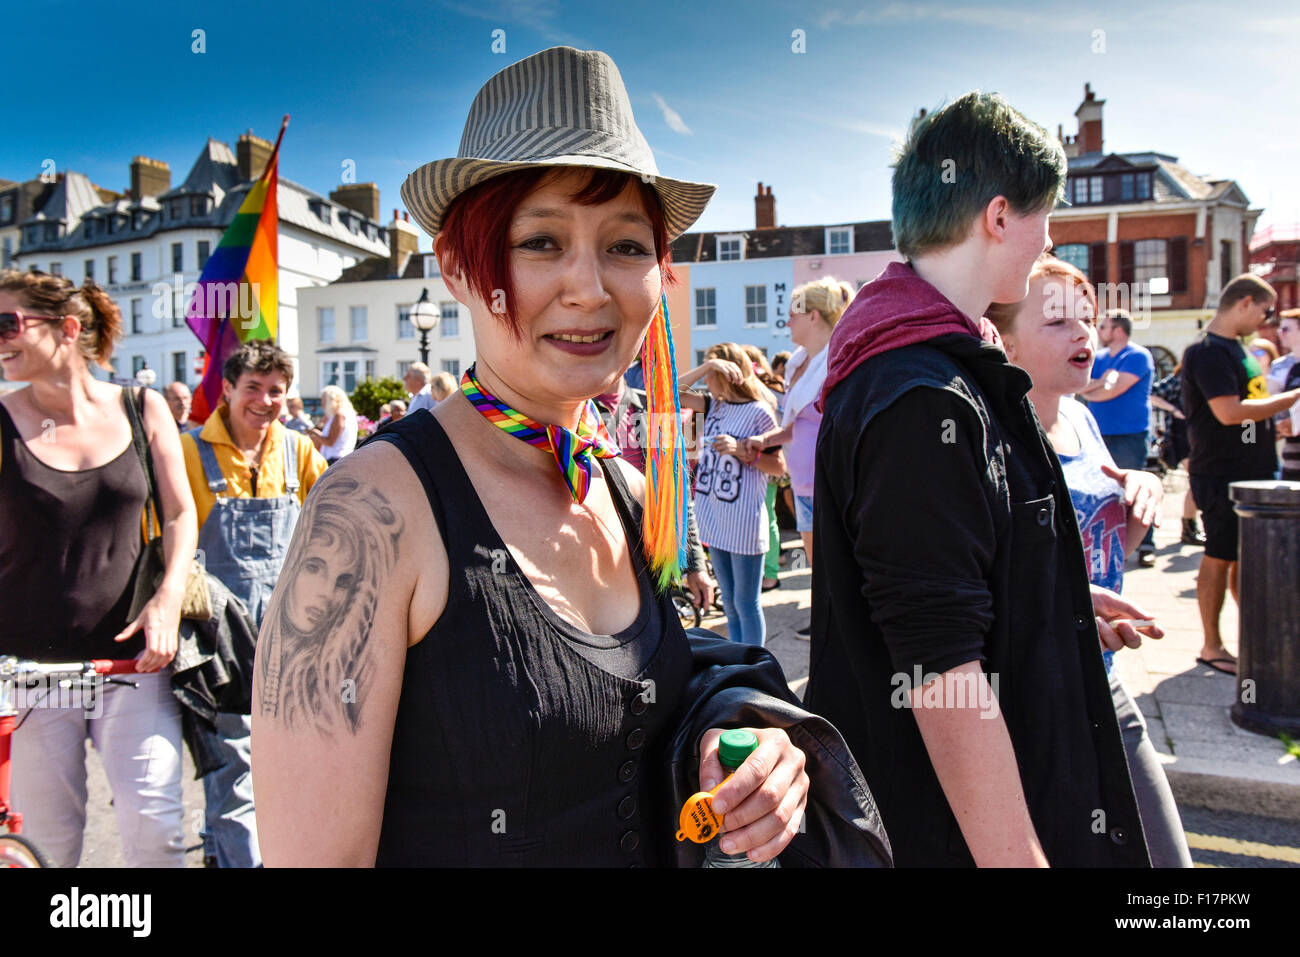 Margate, Kent, UK. 29th August, 2015. Huge crowds from all over Europe gather together in the seaside town of Margate to celebrate Kent Pride, 2015. Alamy Live News/Photographer: Credit:  Gordon Scammell Stock Photo